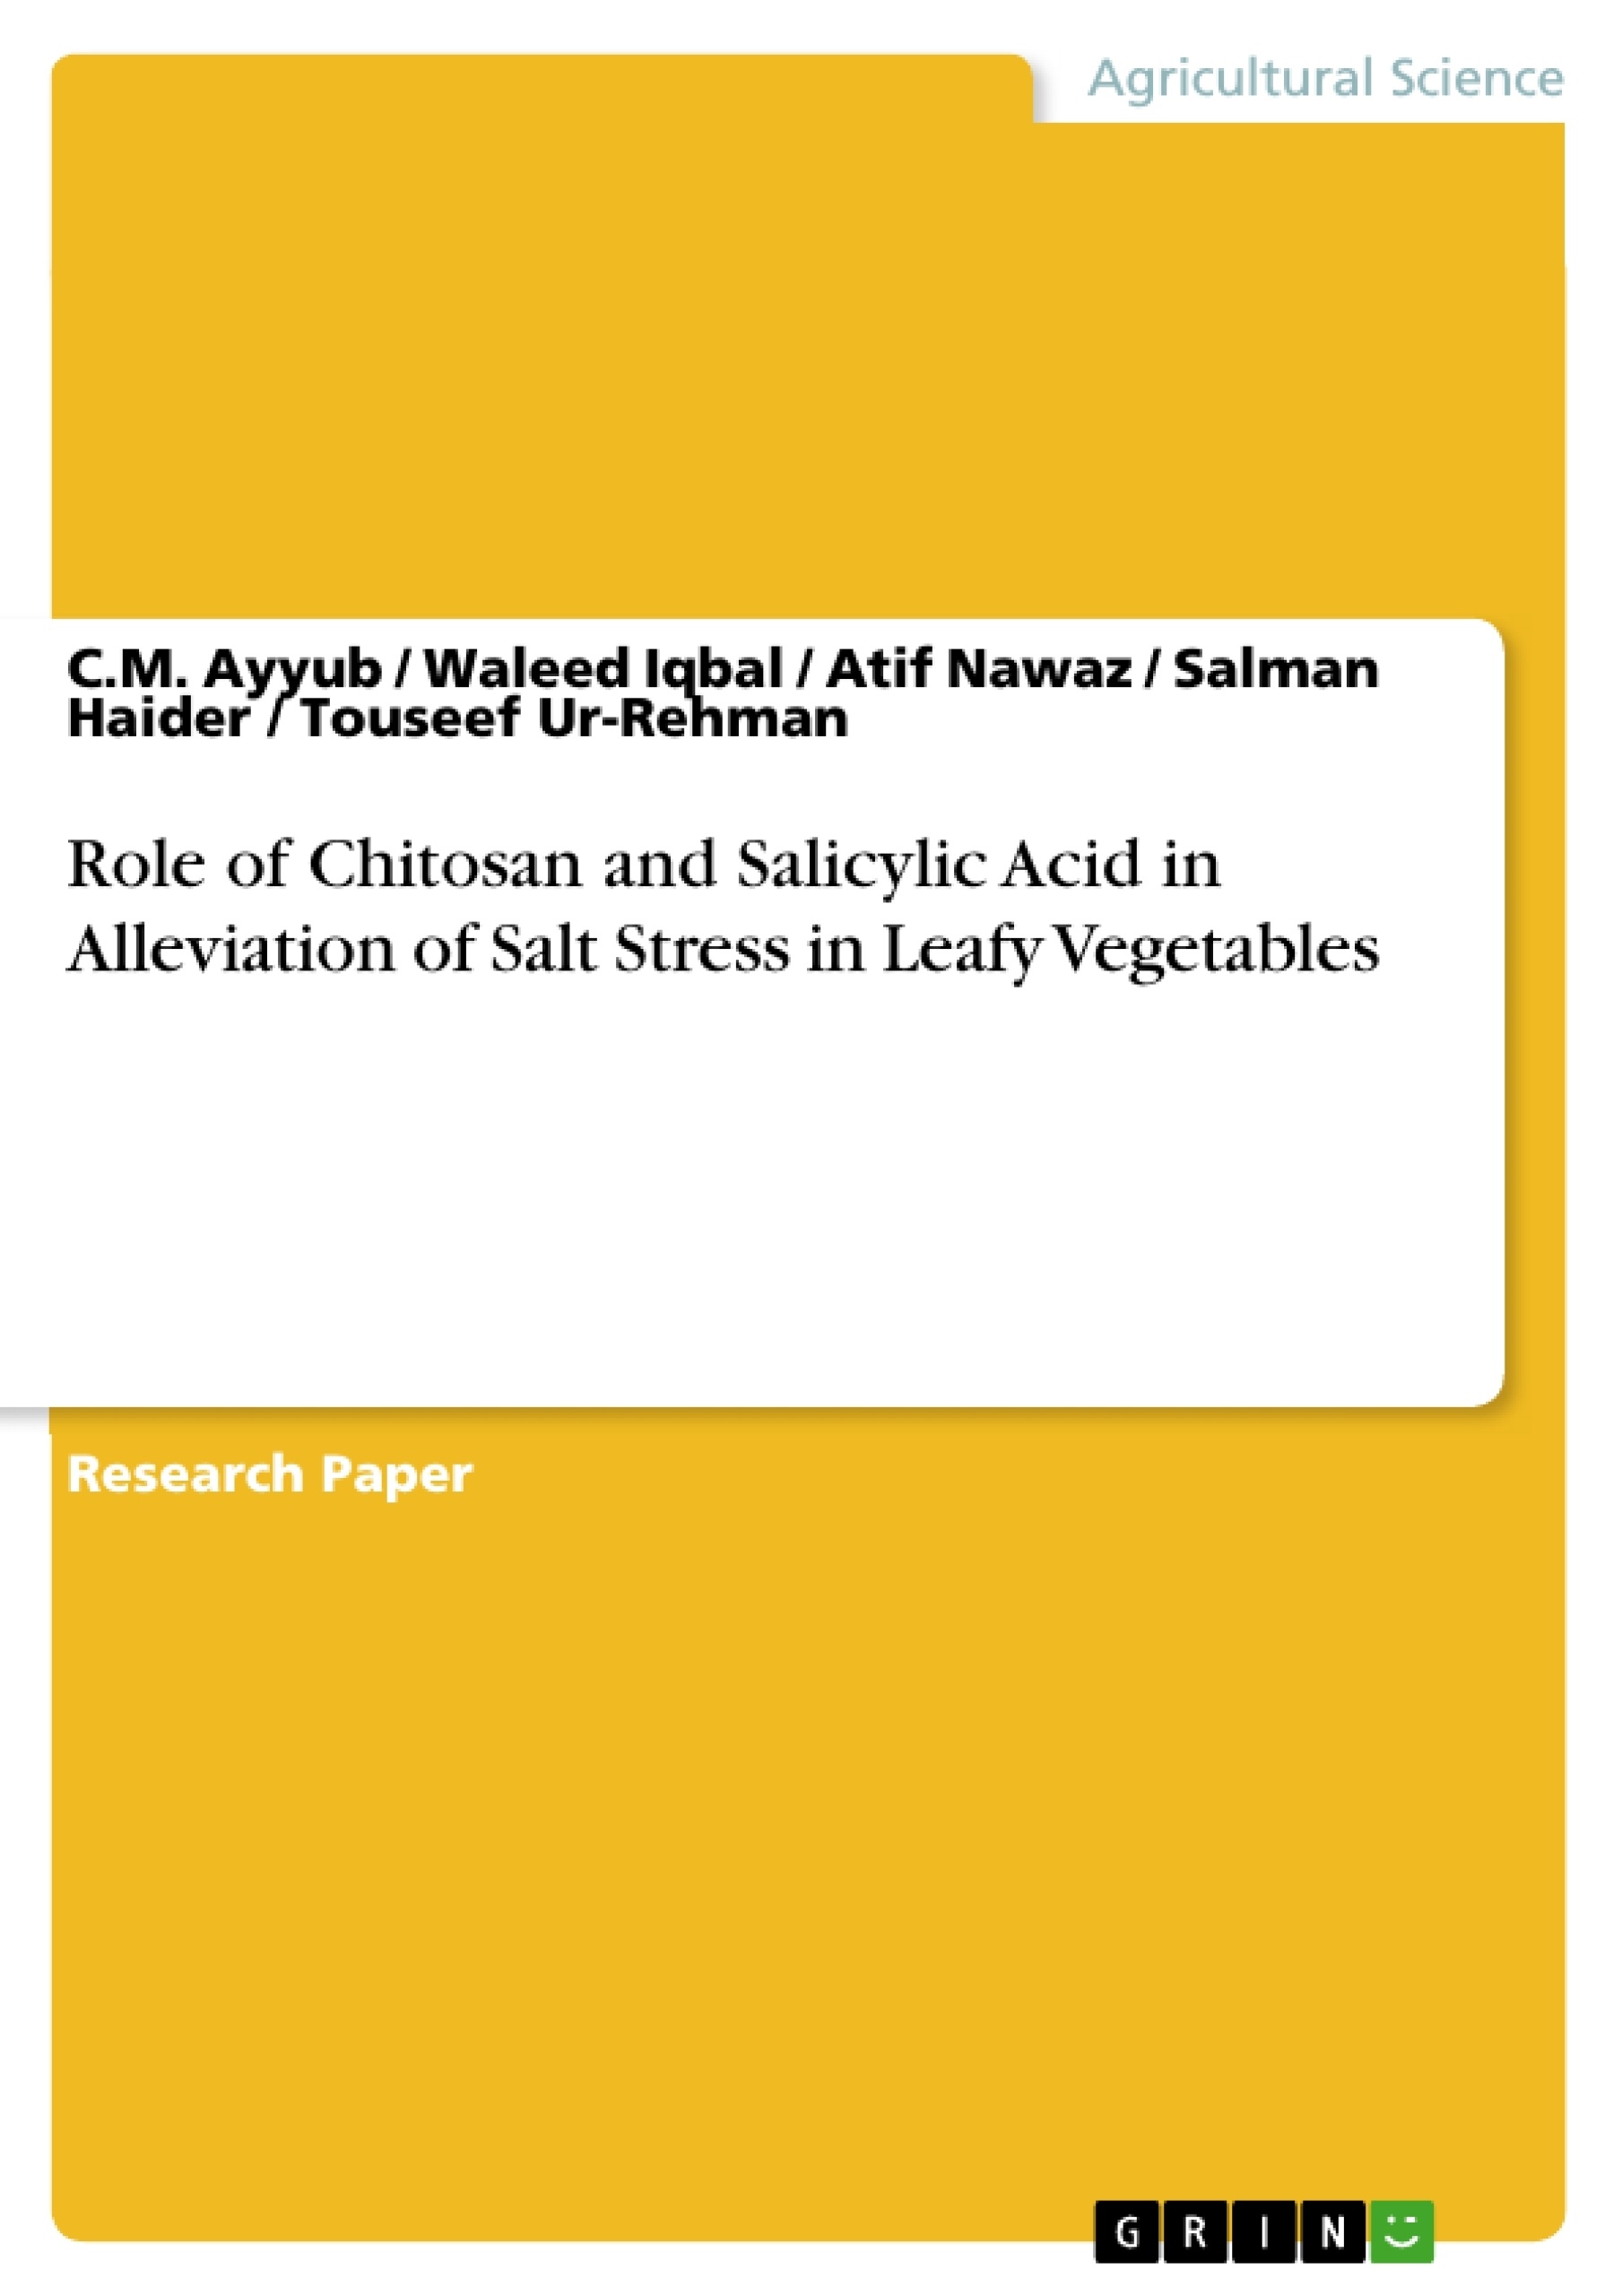 Título: Role of Chitosan and Salicylic Acid in Alleviation of Salt Stress in Leafy Vegetables